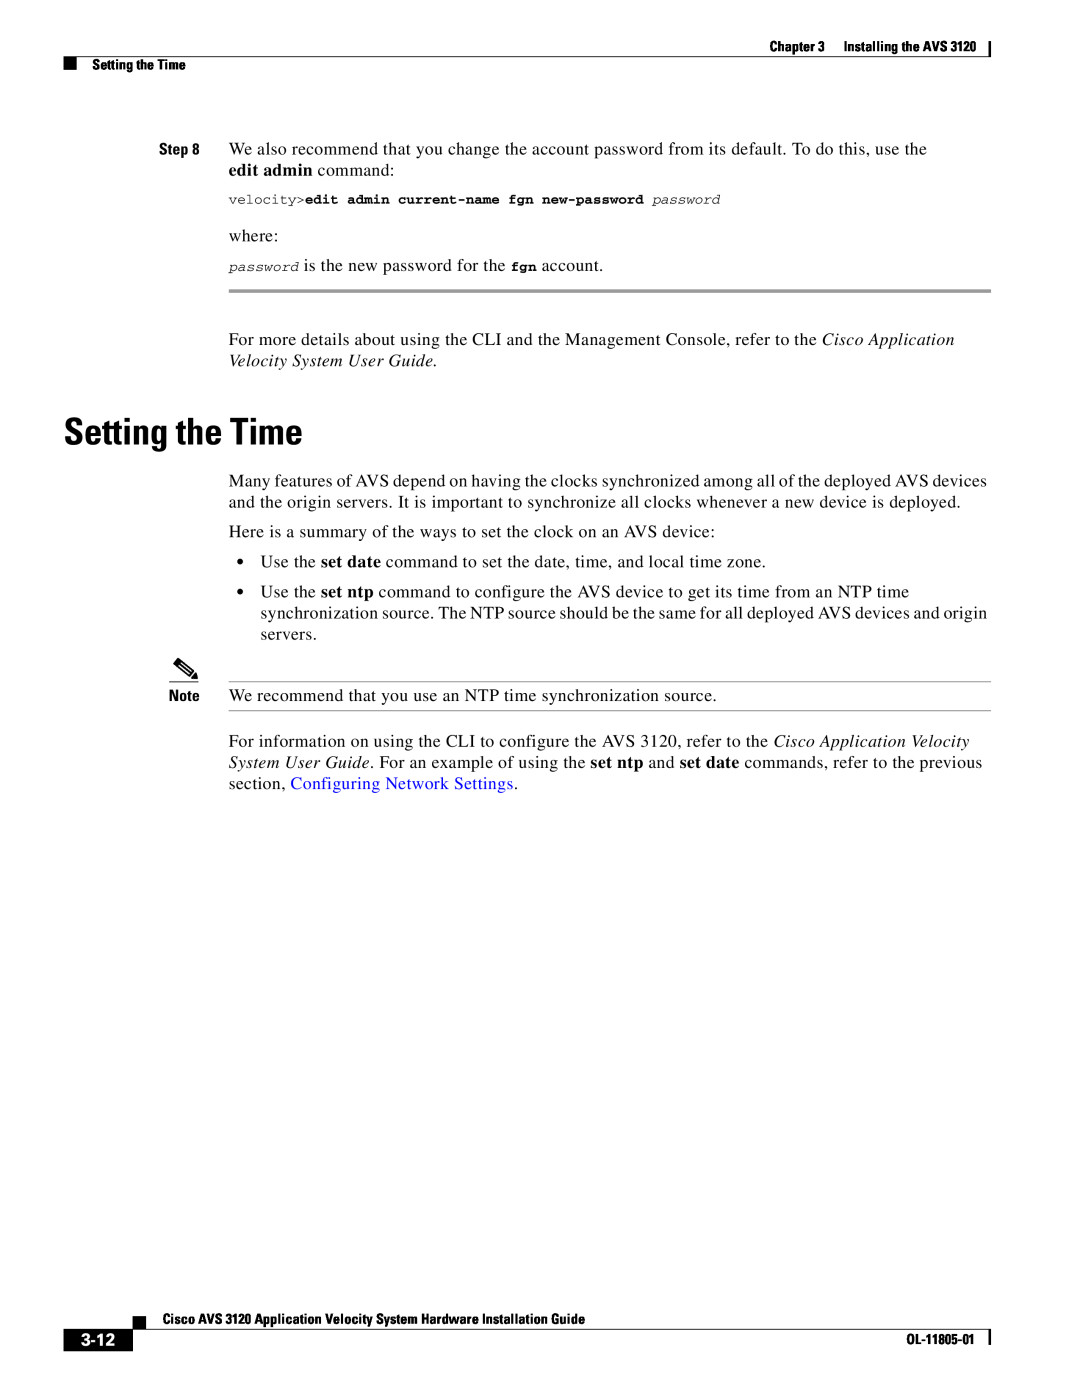 Cisco Systems AVS 3120 installation instructions Setting the Time, 3-12 